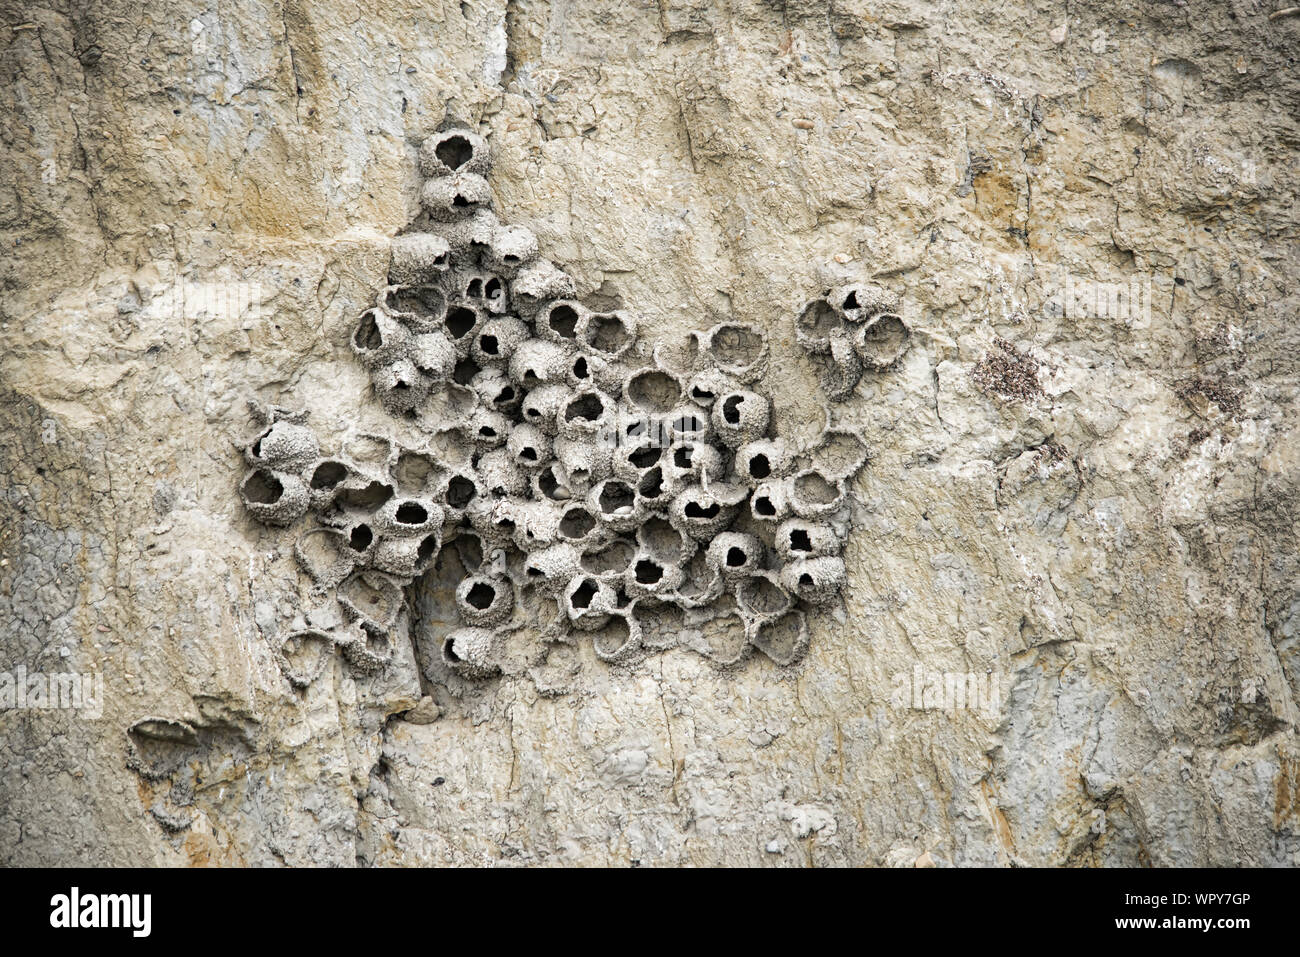 American Cliff Swallow Nests Stock Photo